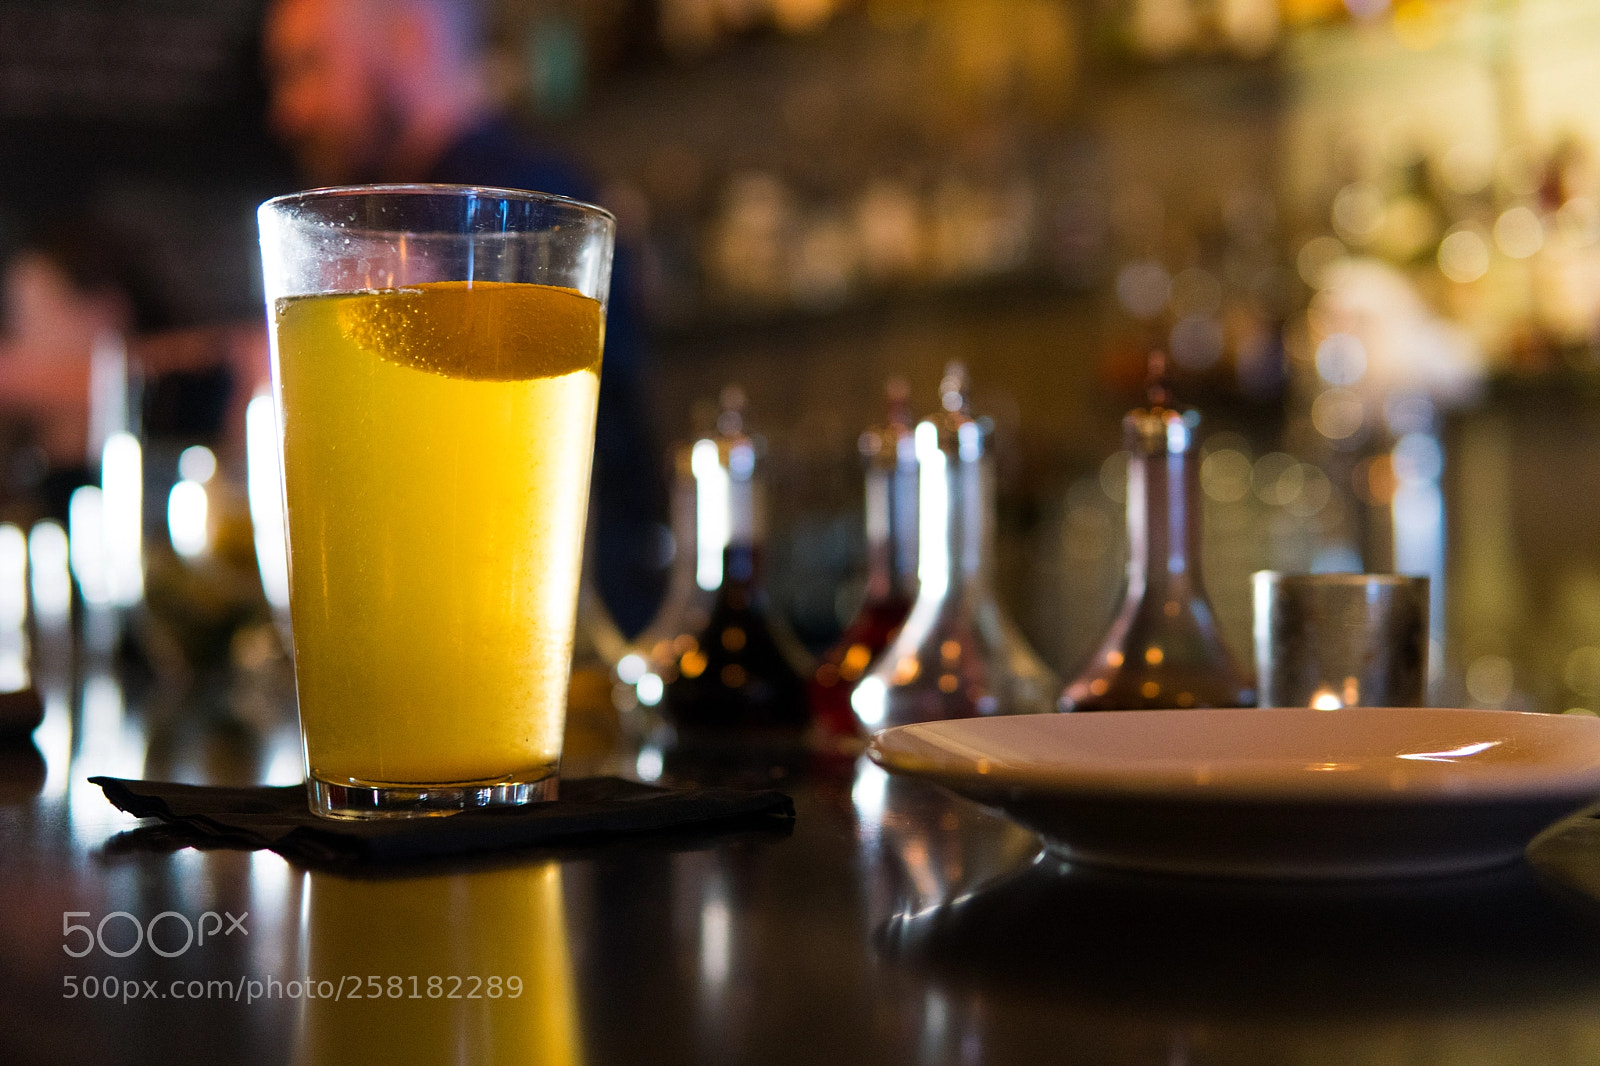 Sony a6500 sample photo. Shandy time photography